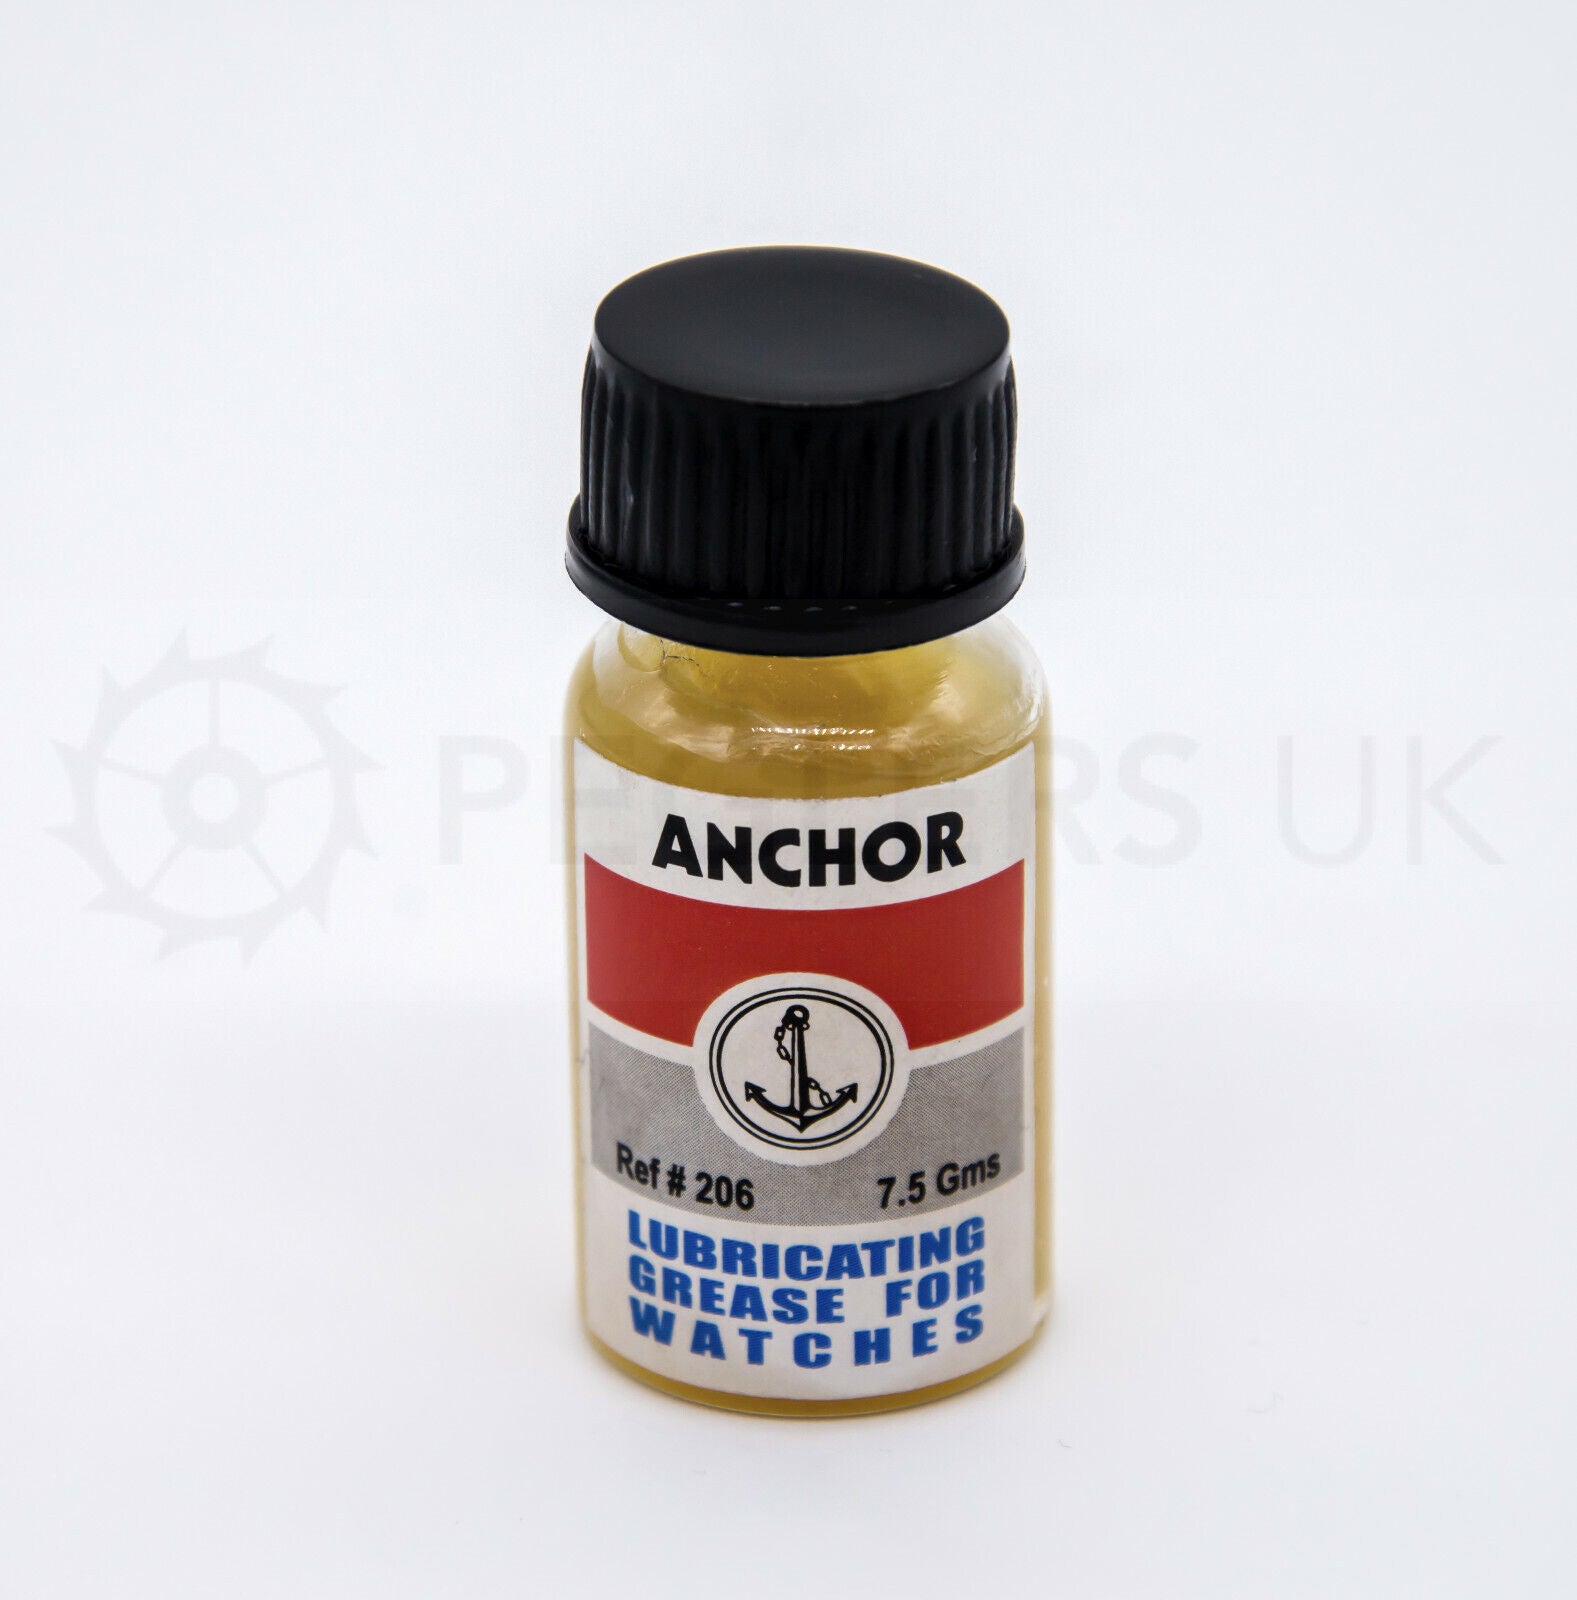 Anchor Lubricating Grease for Watches - 7.5g